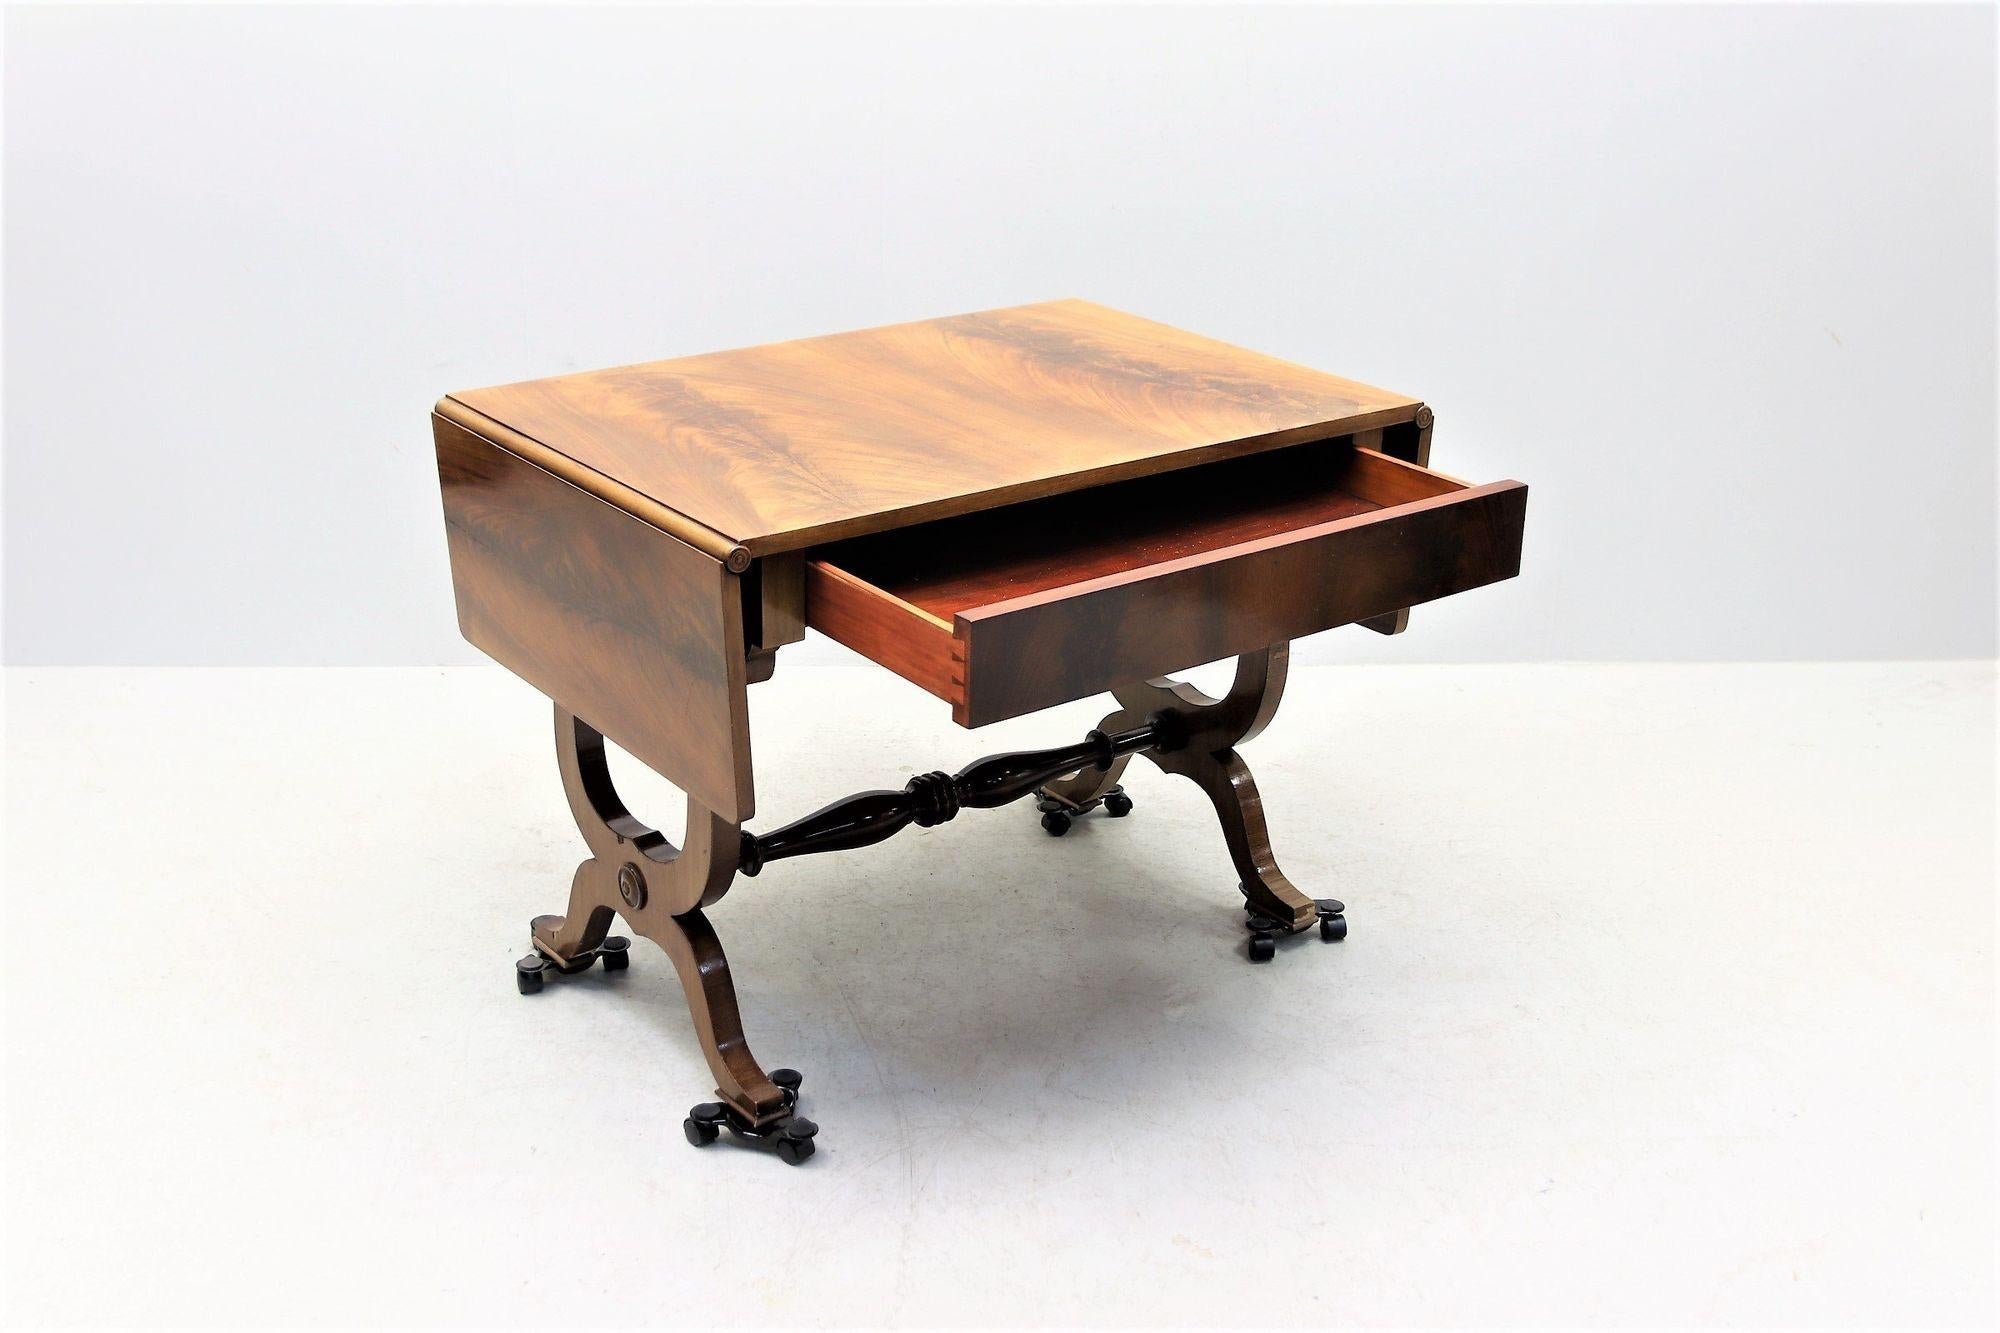 1900s Empire-Style Desk with Gorgeous Veneer Wood Grain Detail & Carved Legs In Good Condition For Sale In Memphis, TN